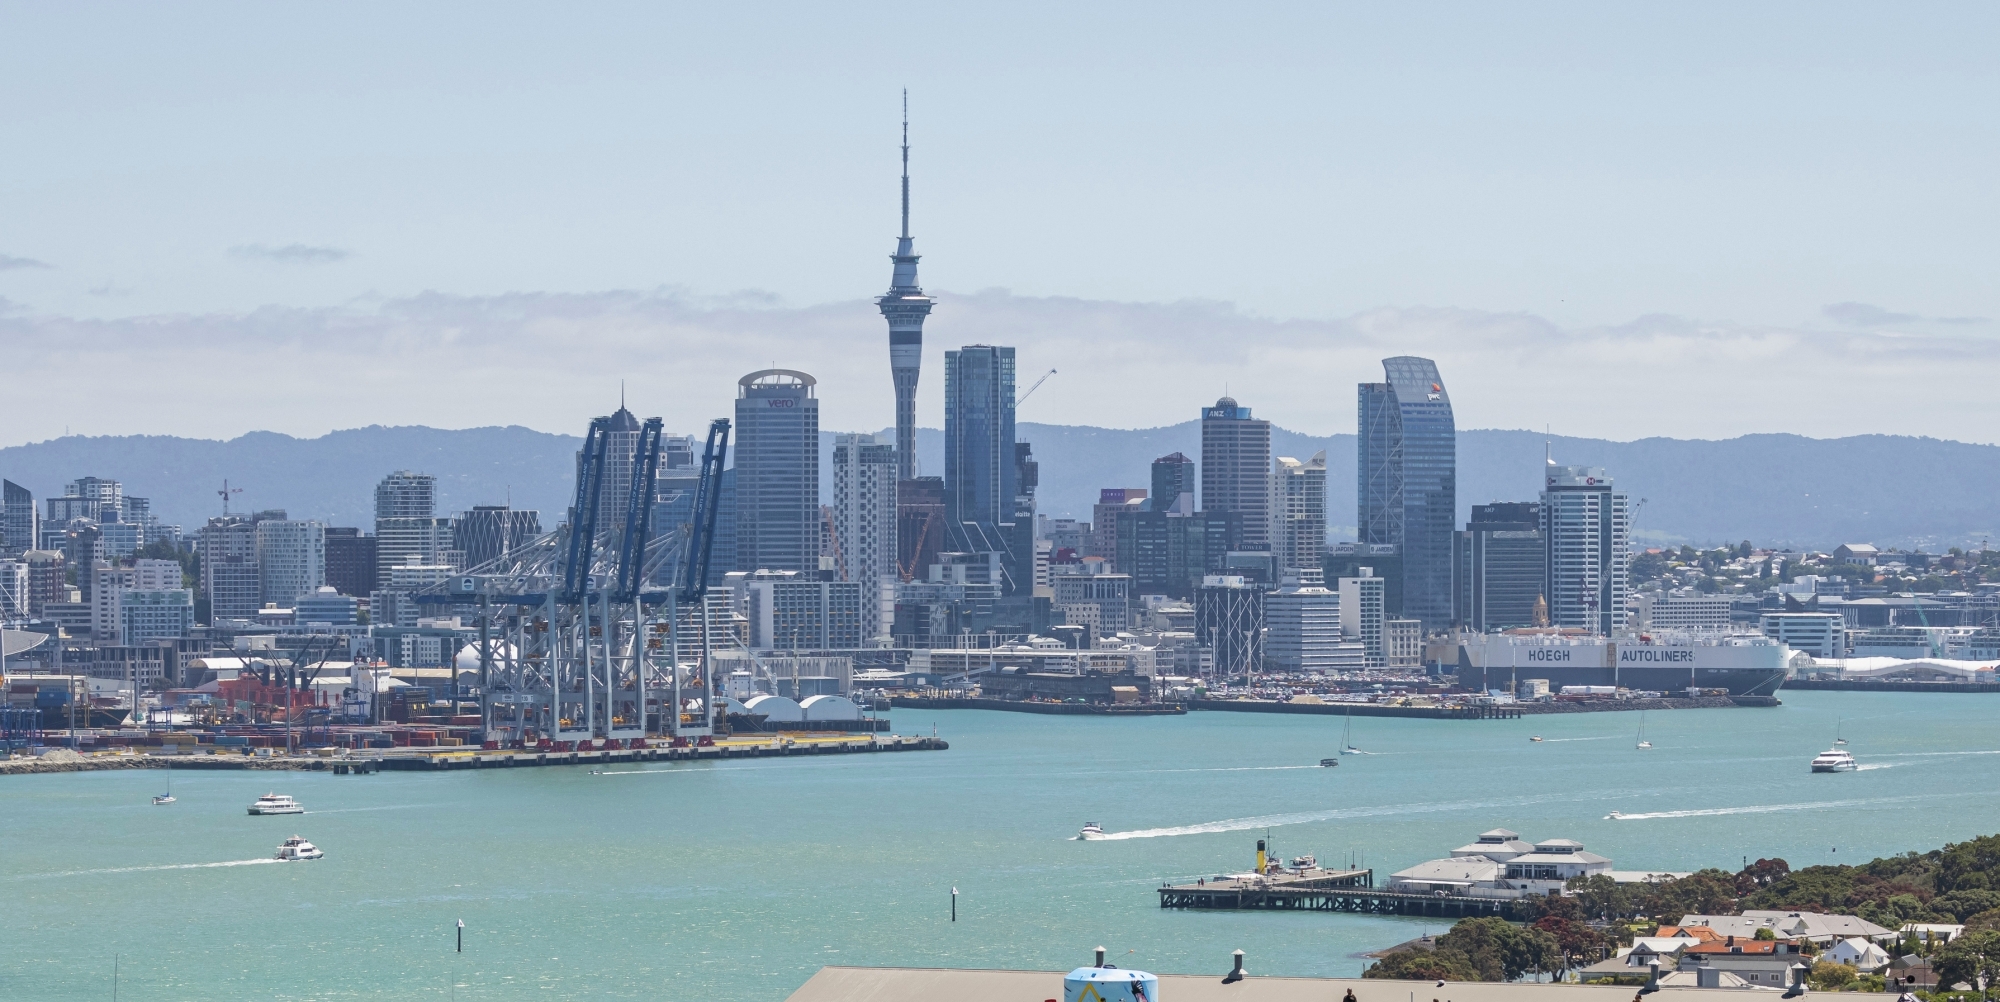  America's Cup  Auckland NZL  First races postponed for Corona reasons !